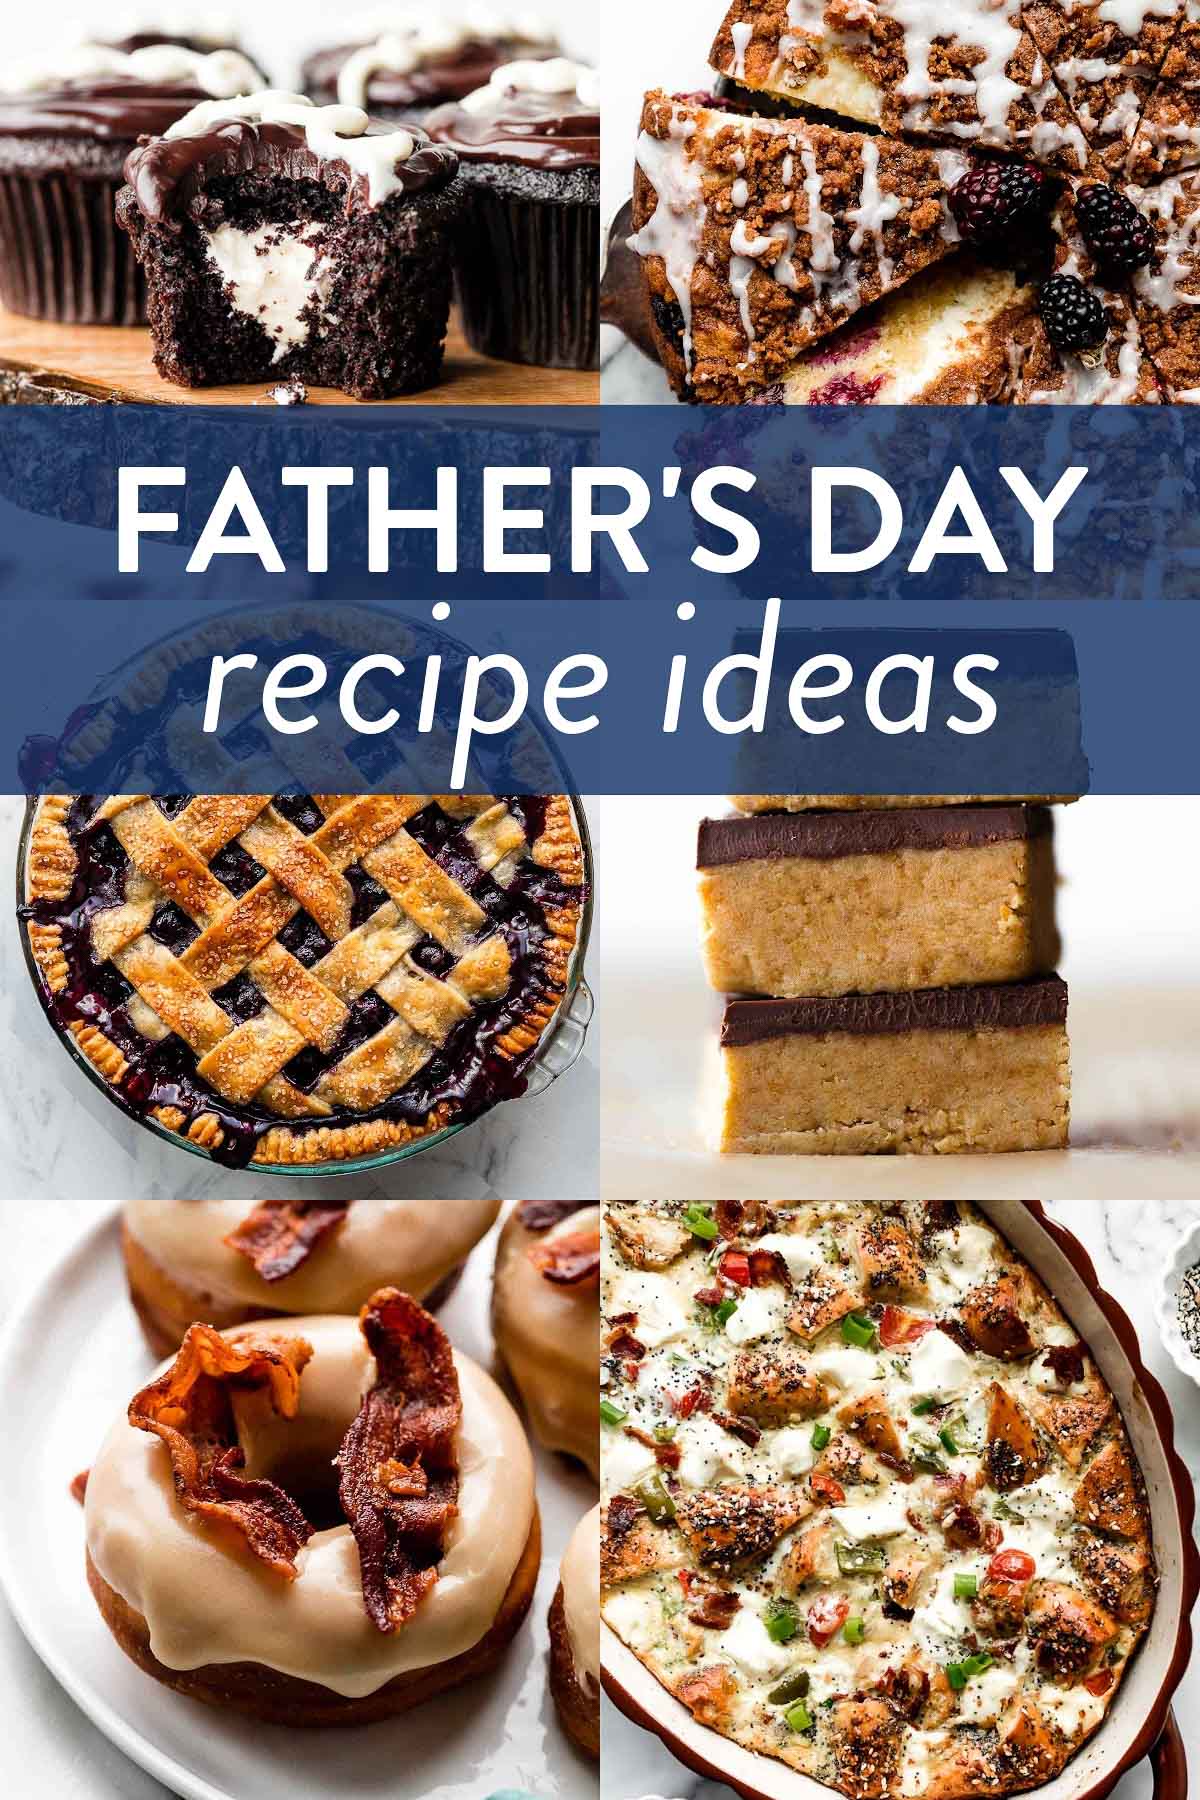 collage of Father's Day recipes including cream-filled cupcakes, blackberry crumb cake, peanut butter bars, blueberry pie, and maple bacon doughnuts.